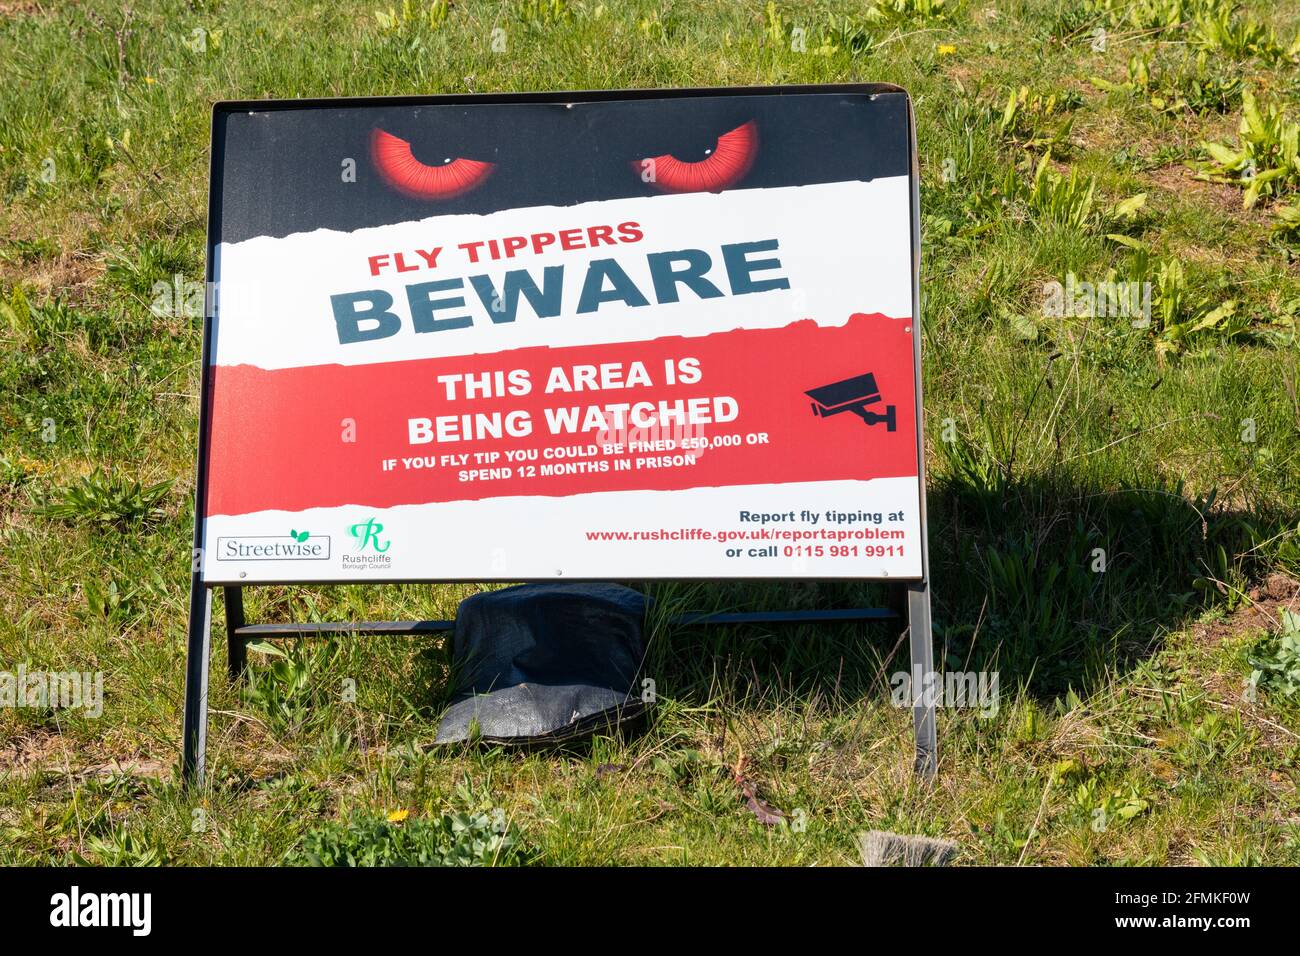 Fly tippers beware sign fly tipping UK countryside Stock Photo